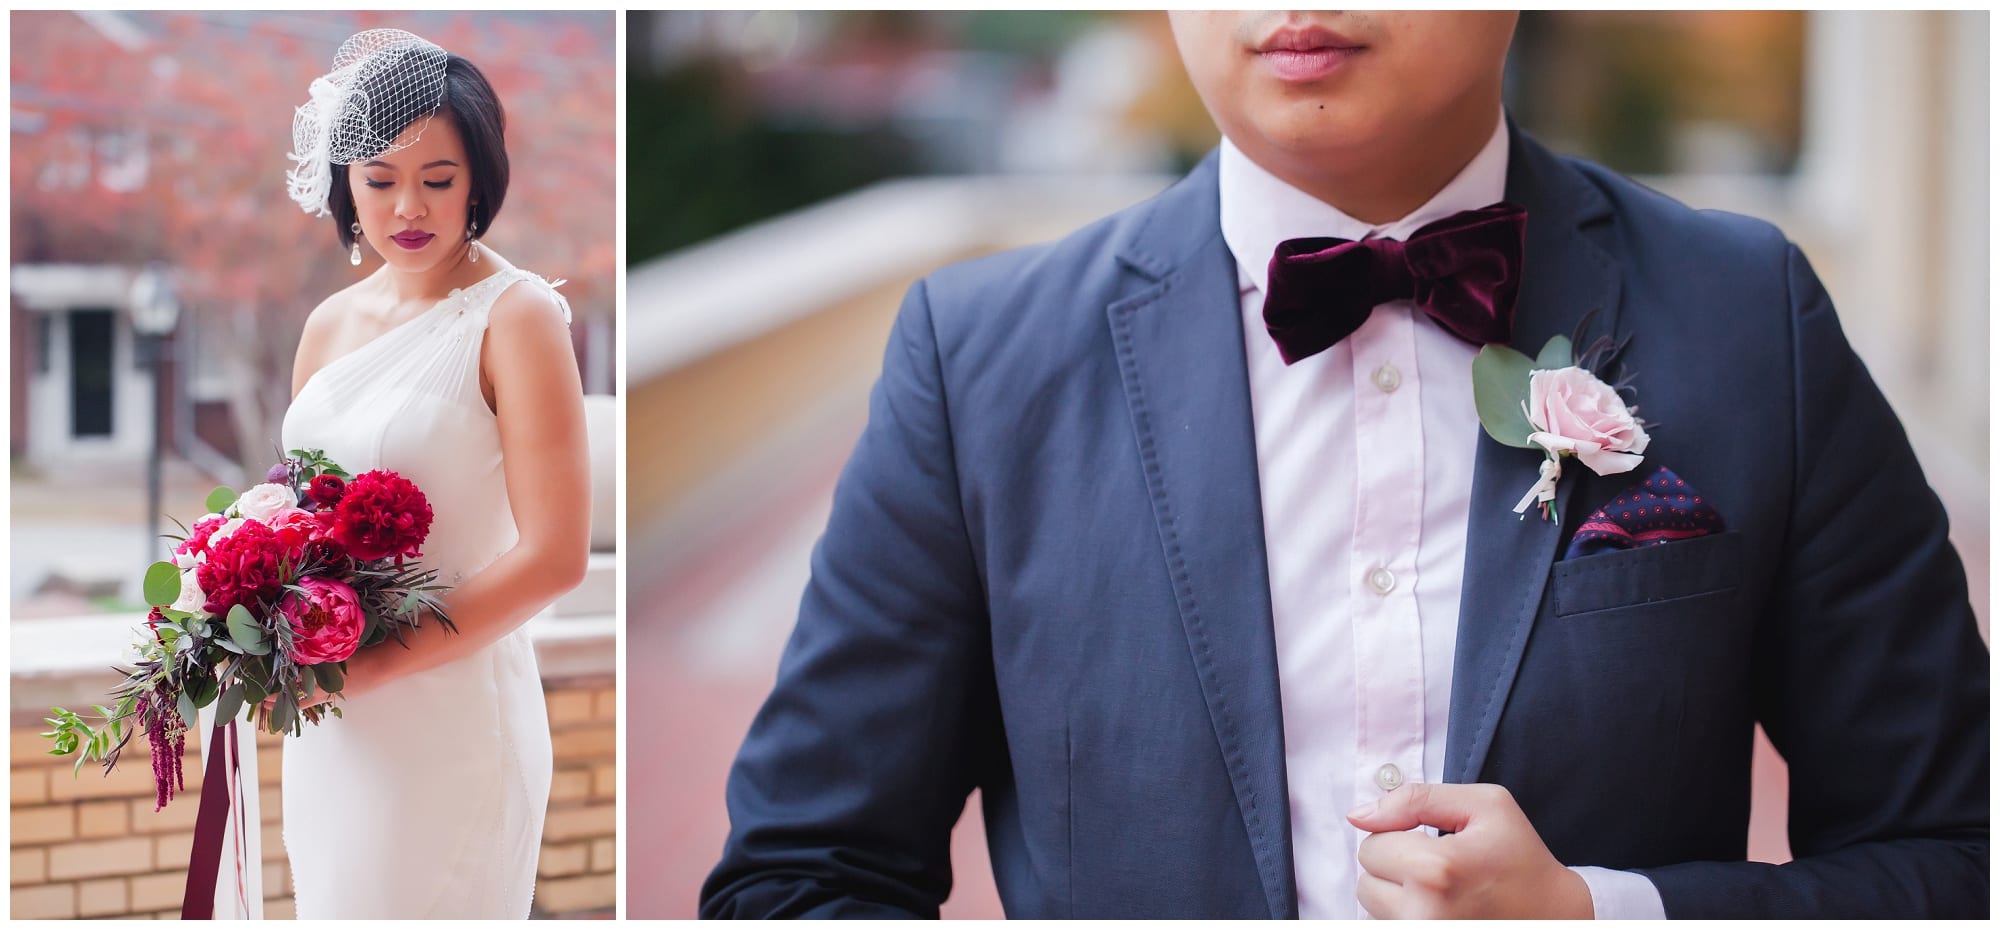 View More: http://caseyhphotos.pass.us/2014styledsessions